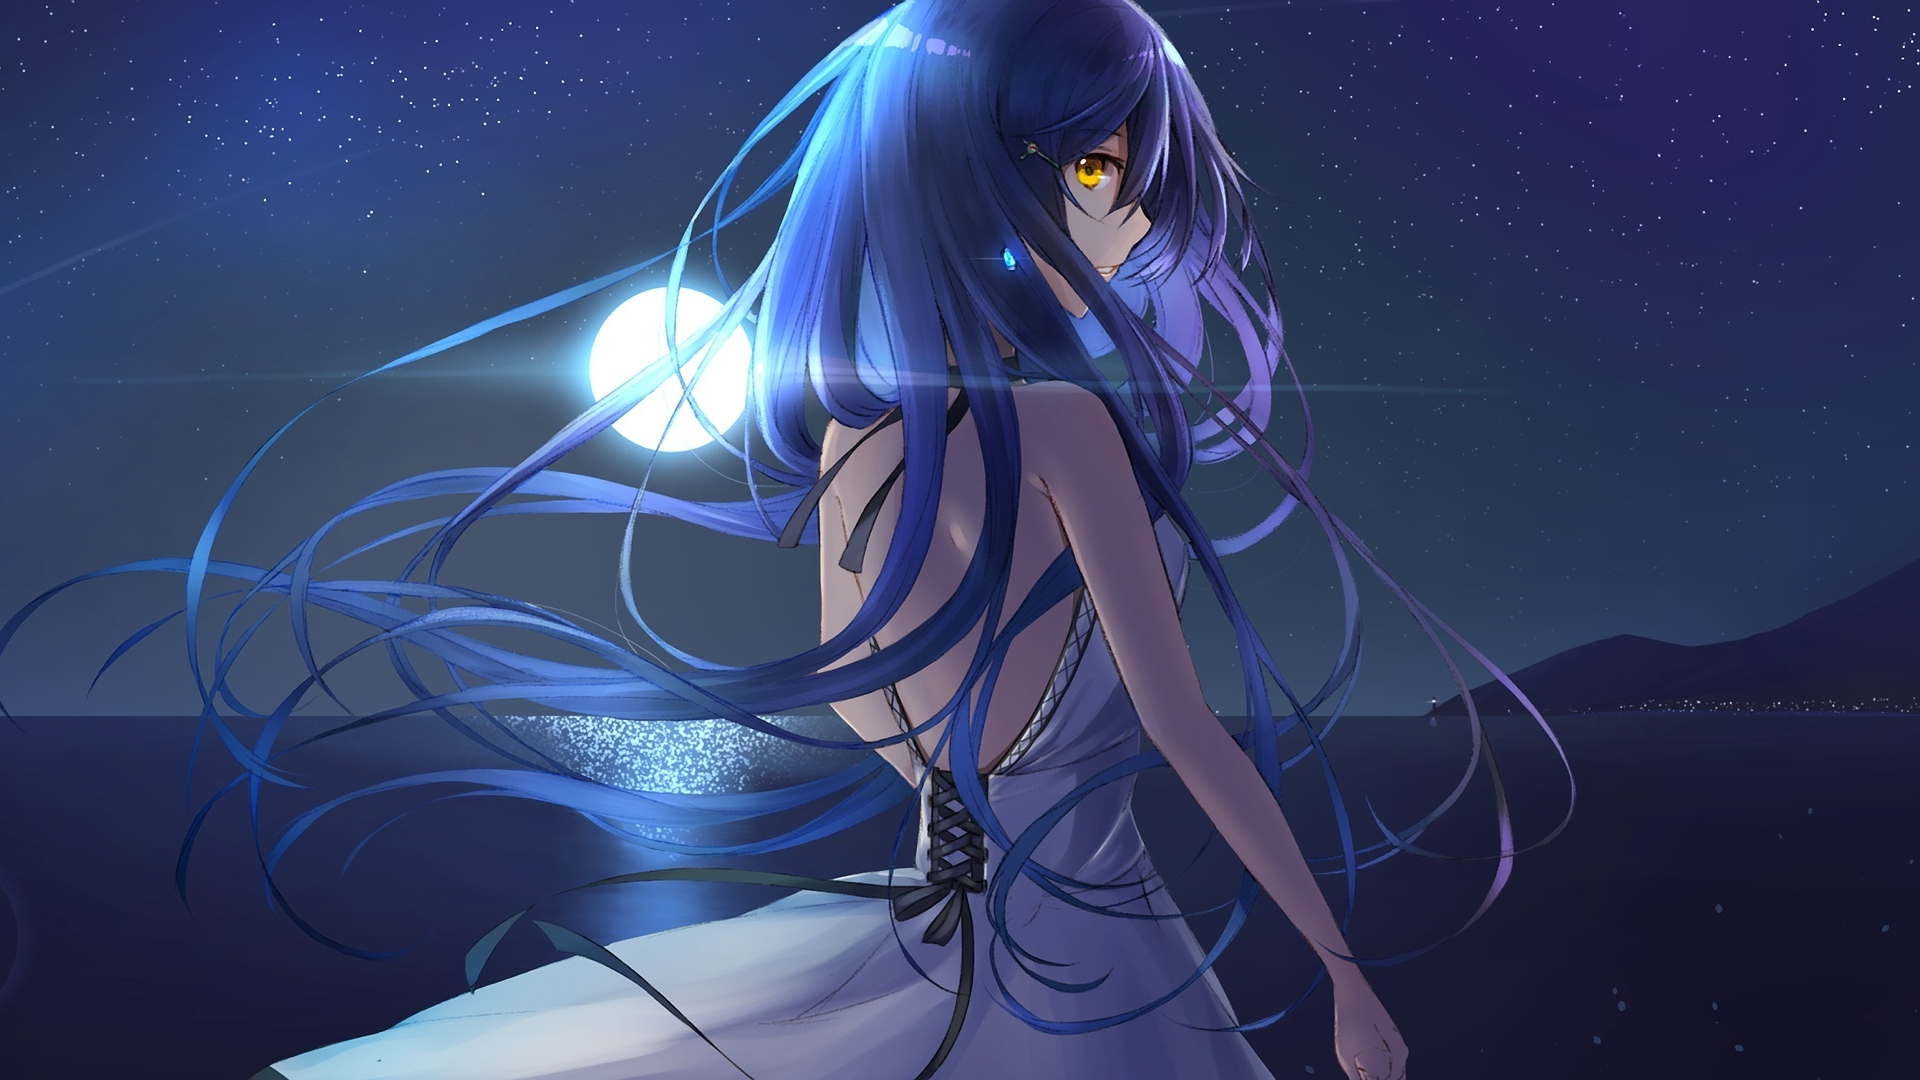 Download 1920x1080 Wallpaper Night Out Anime Girl Blue Long Hair